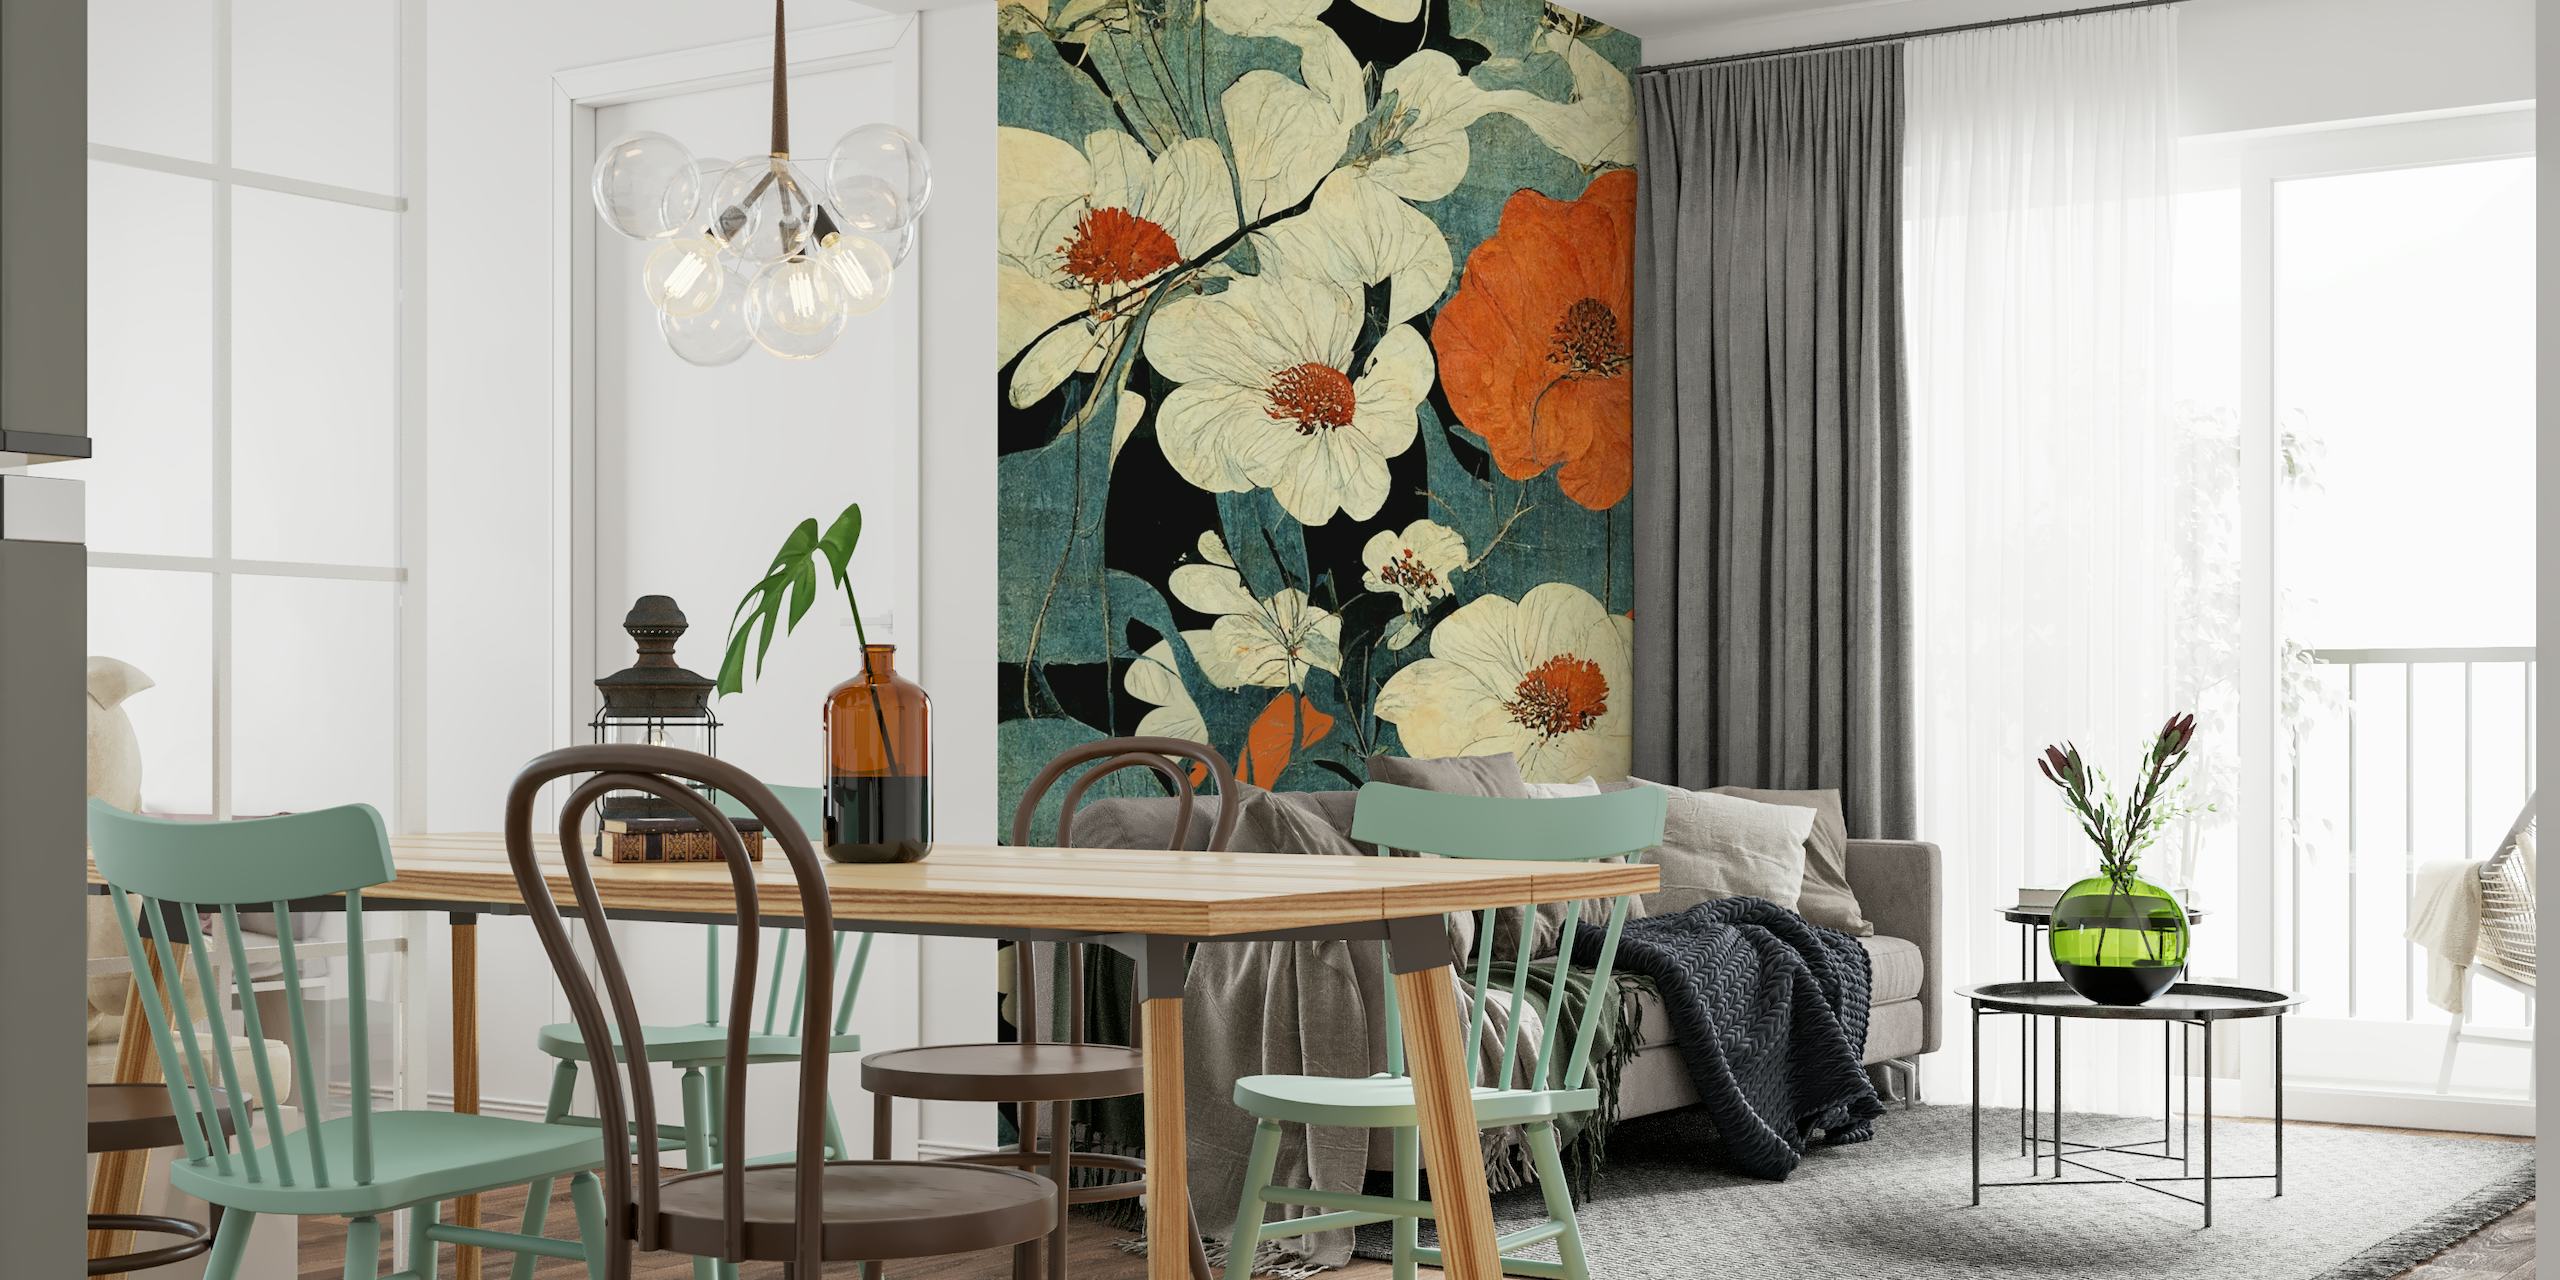 Asian-inspired floral wall mural with blooming white and red flowers against a dark background